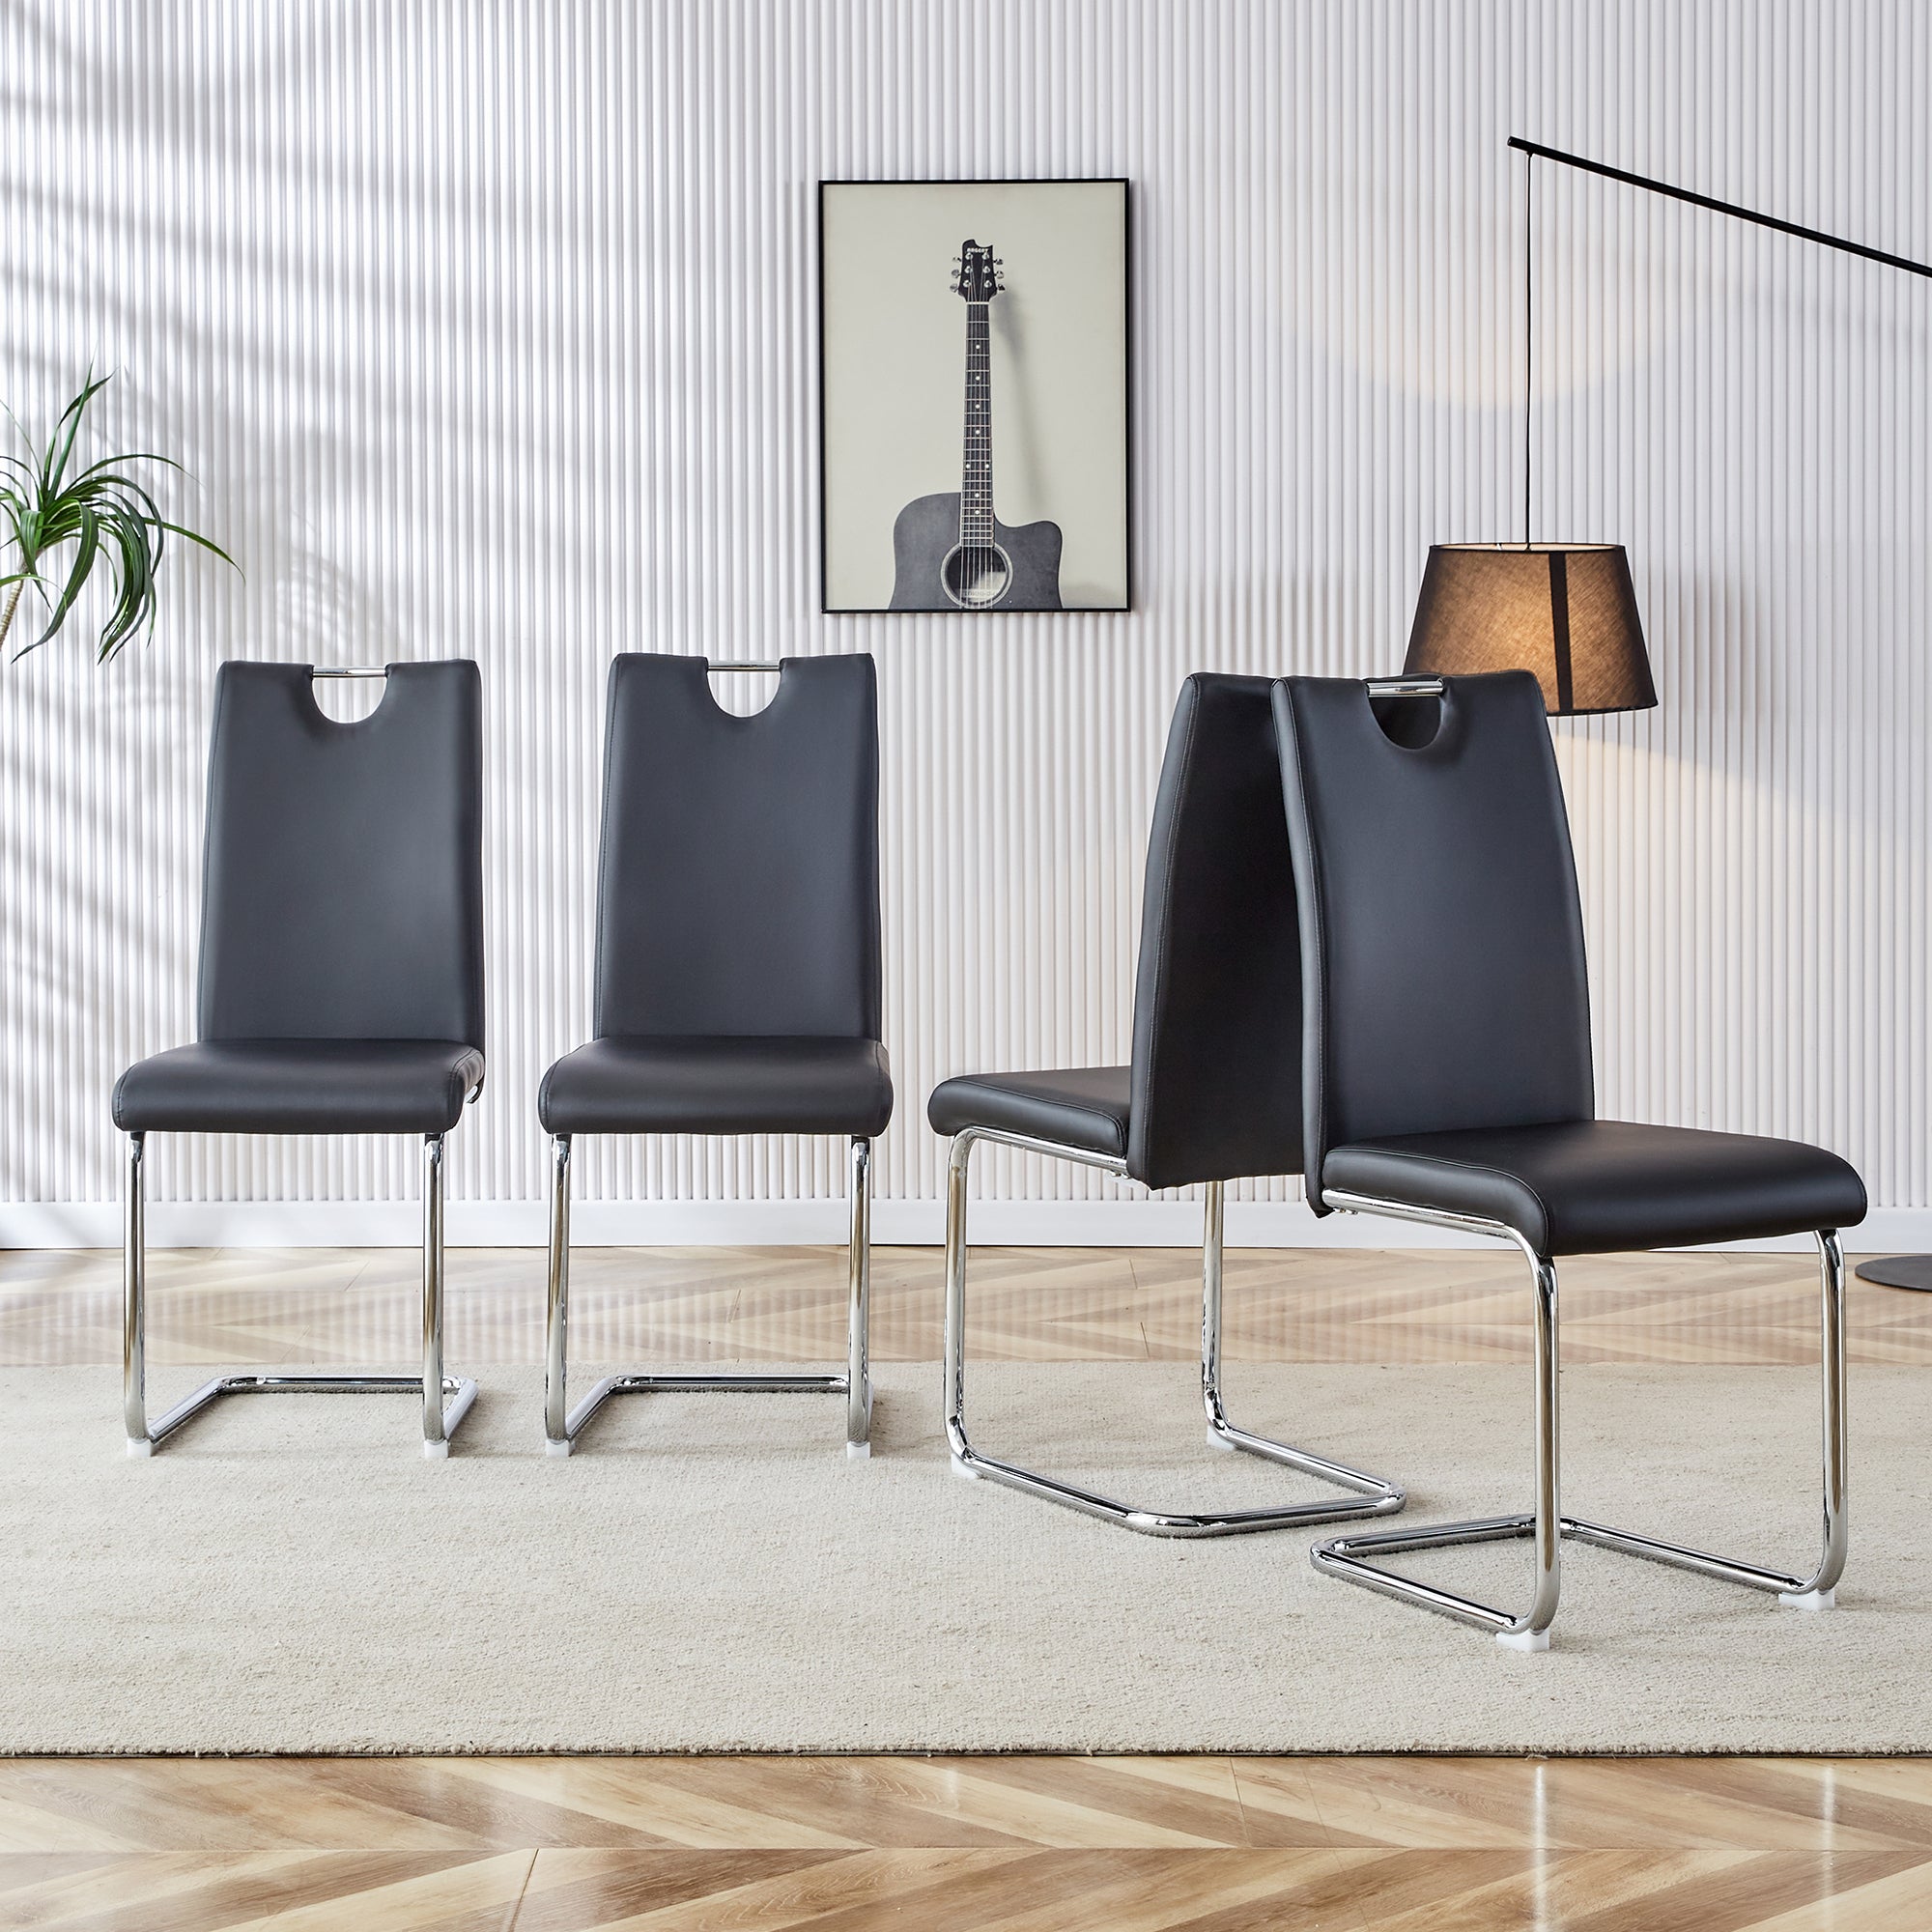 Modern Dining Chairs Set of 4, Side Dining Room